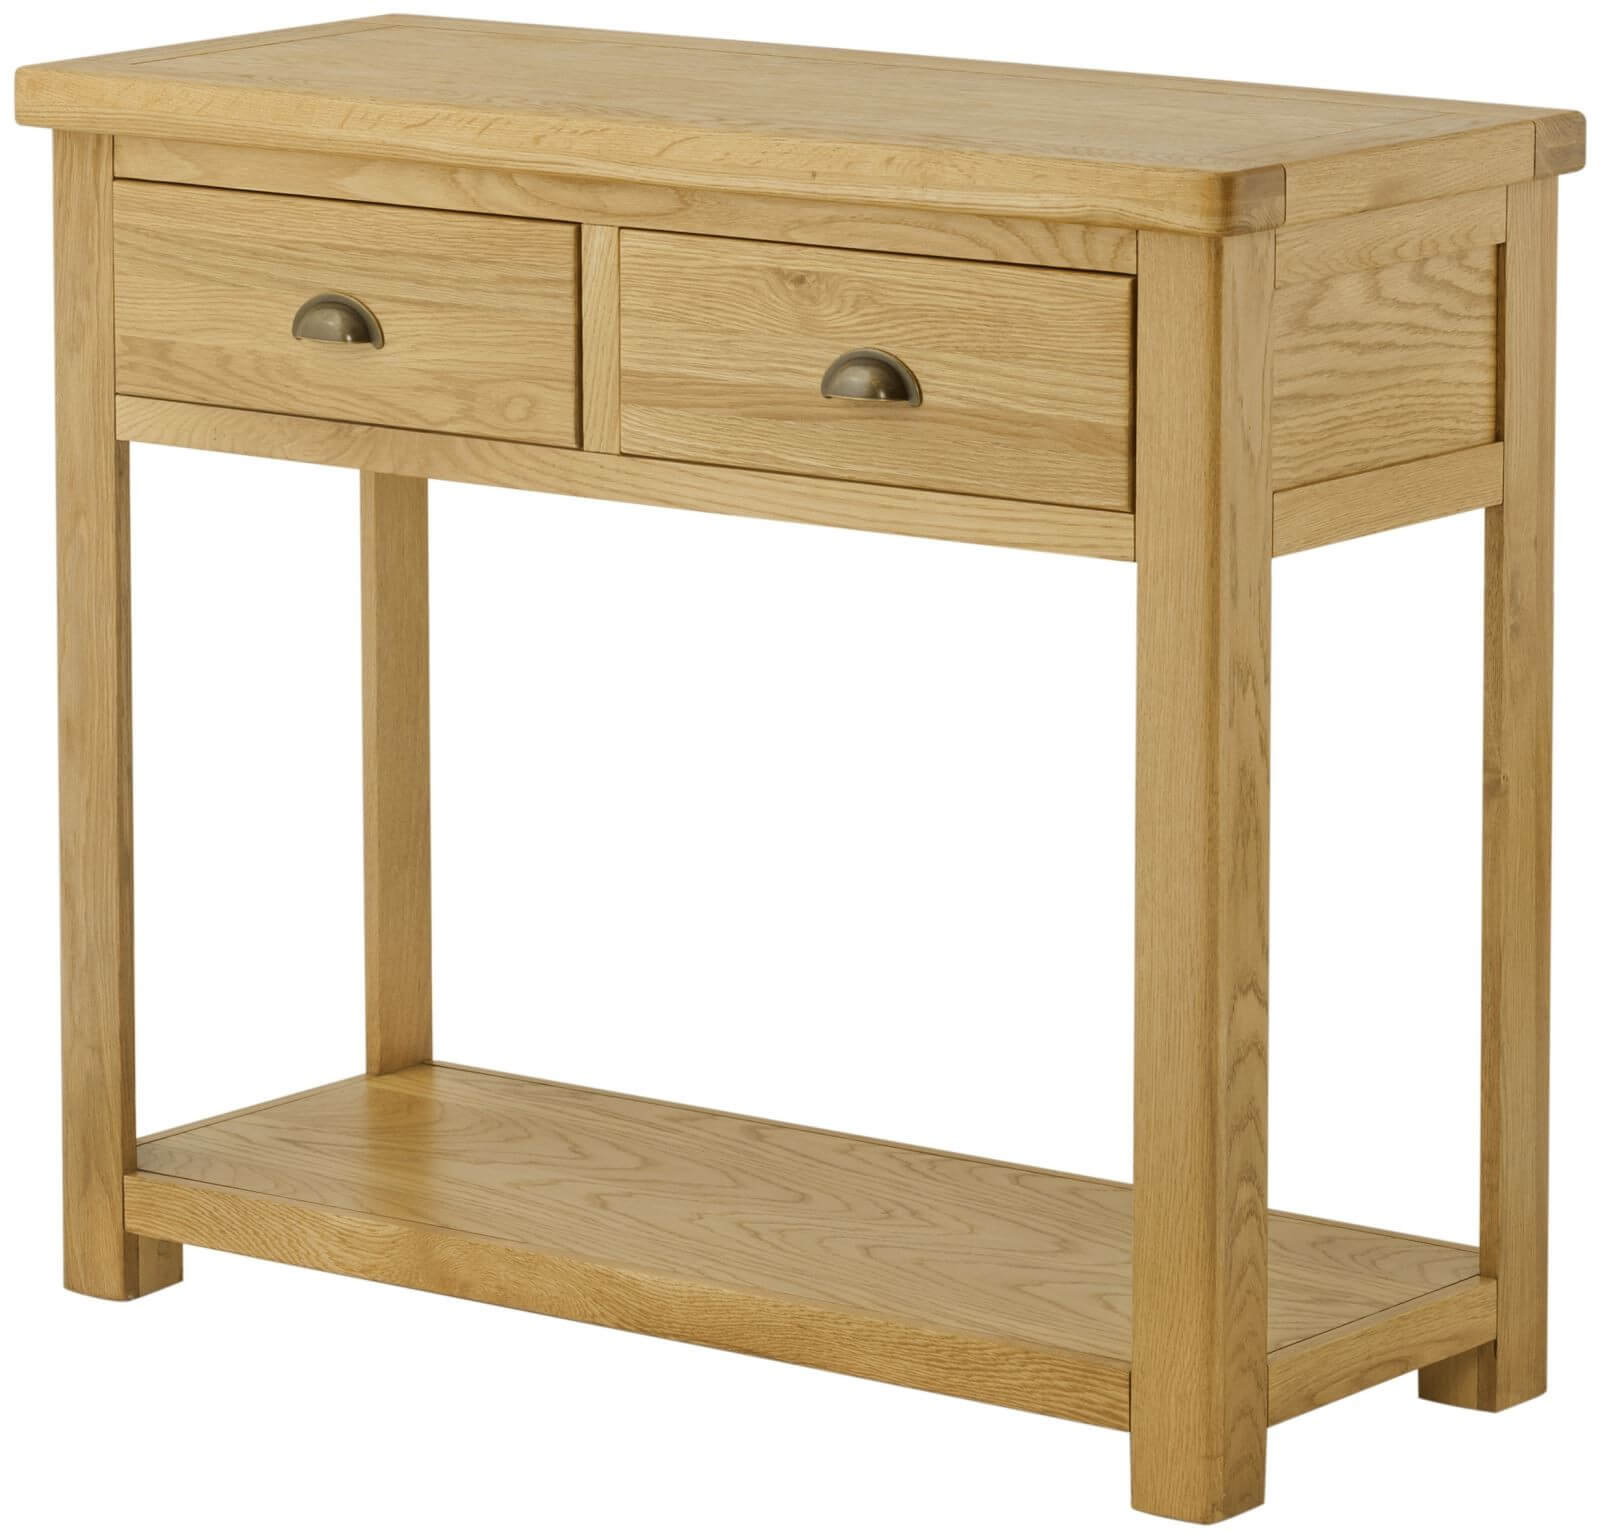 Showing image for Seattle console table - oak